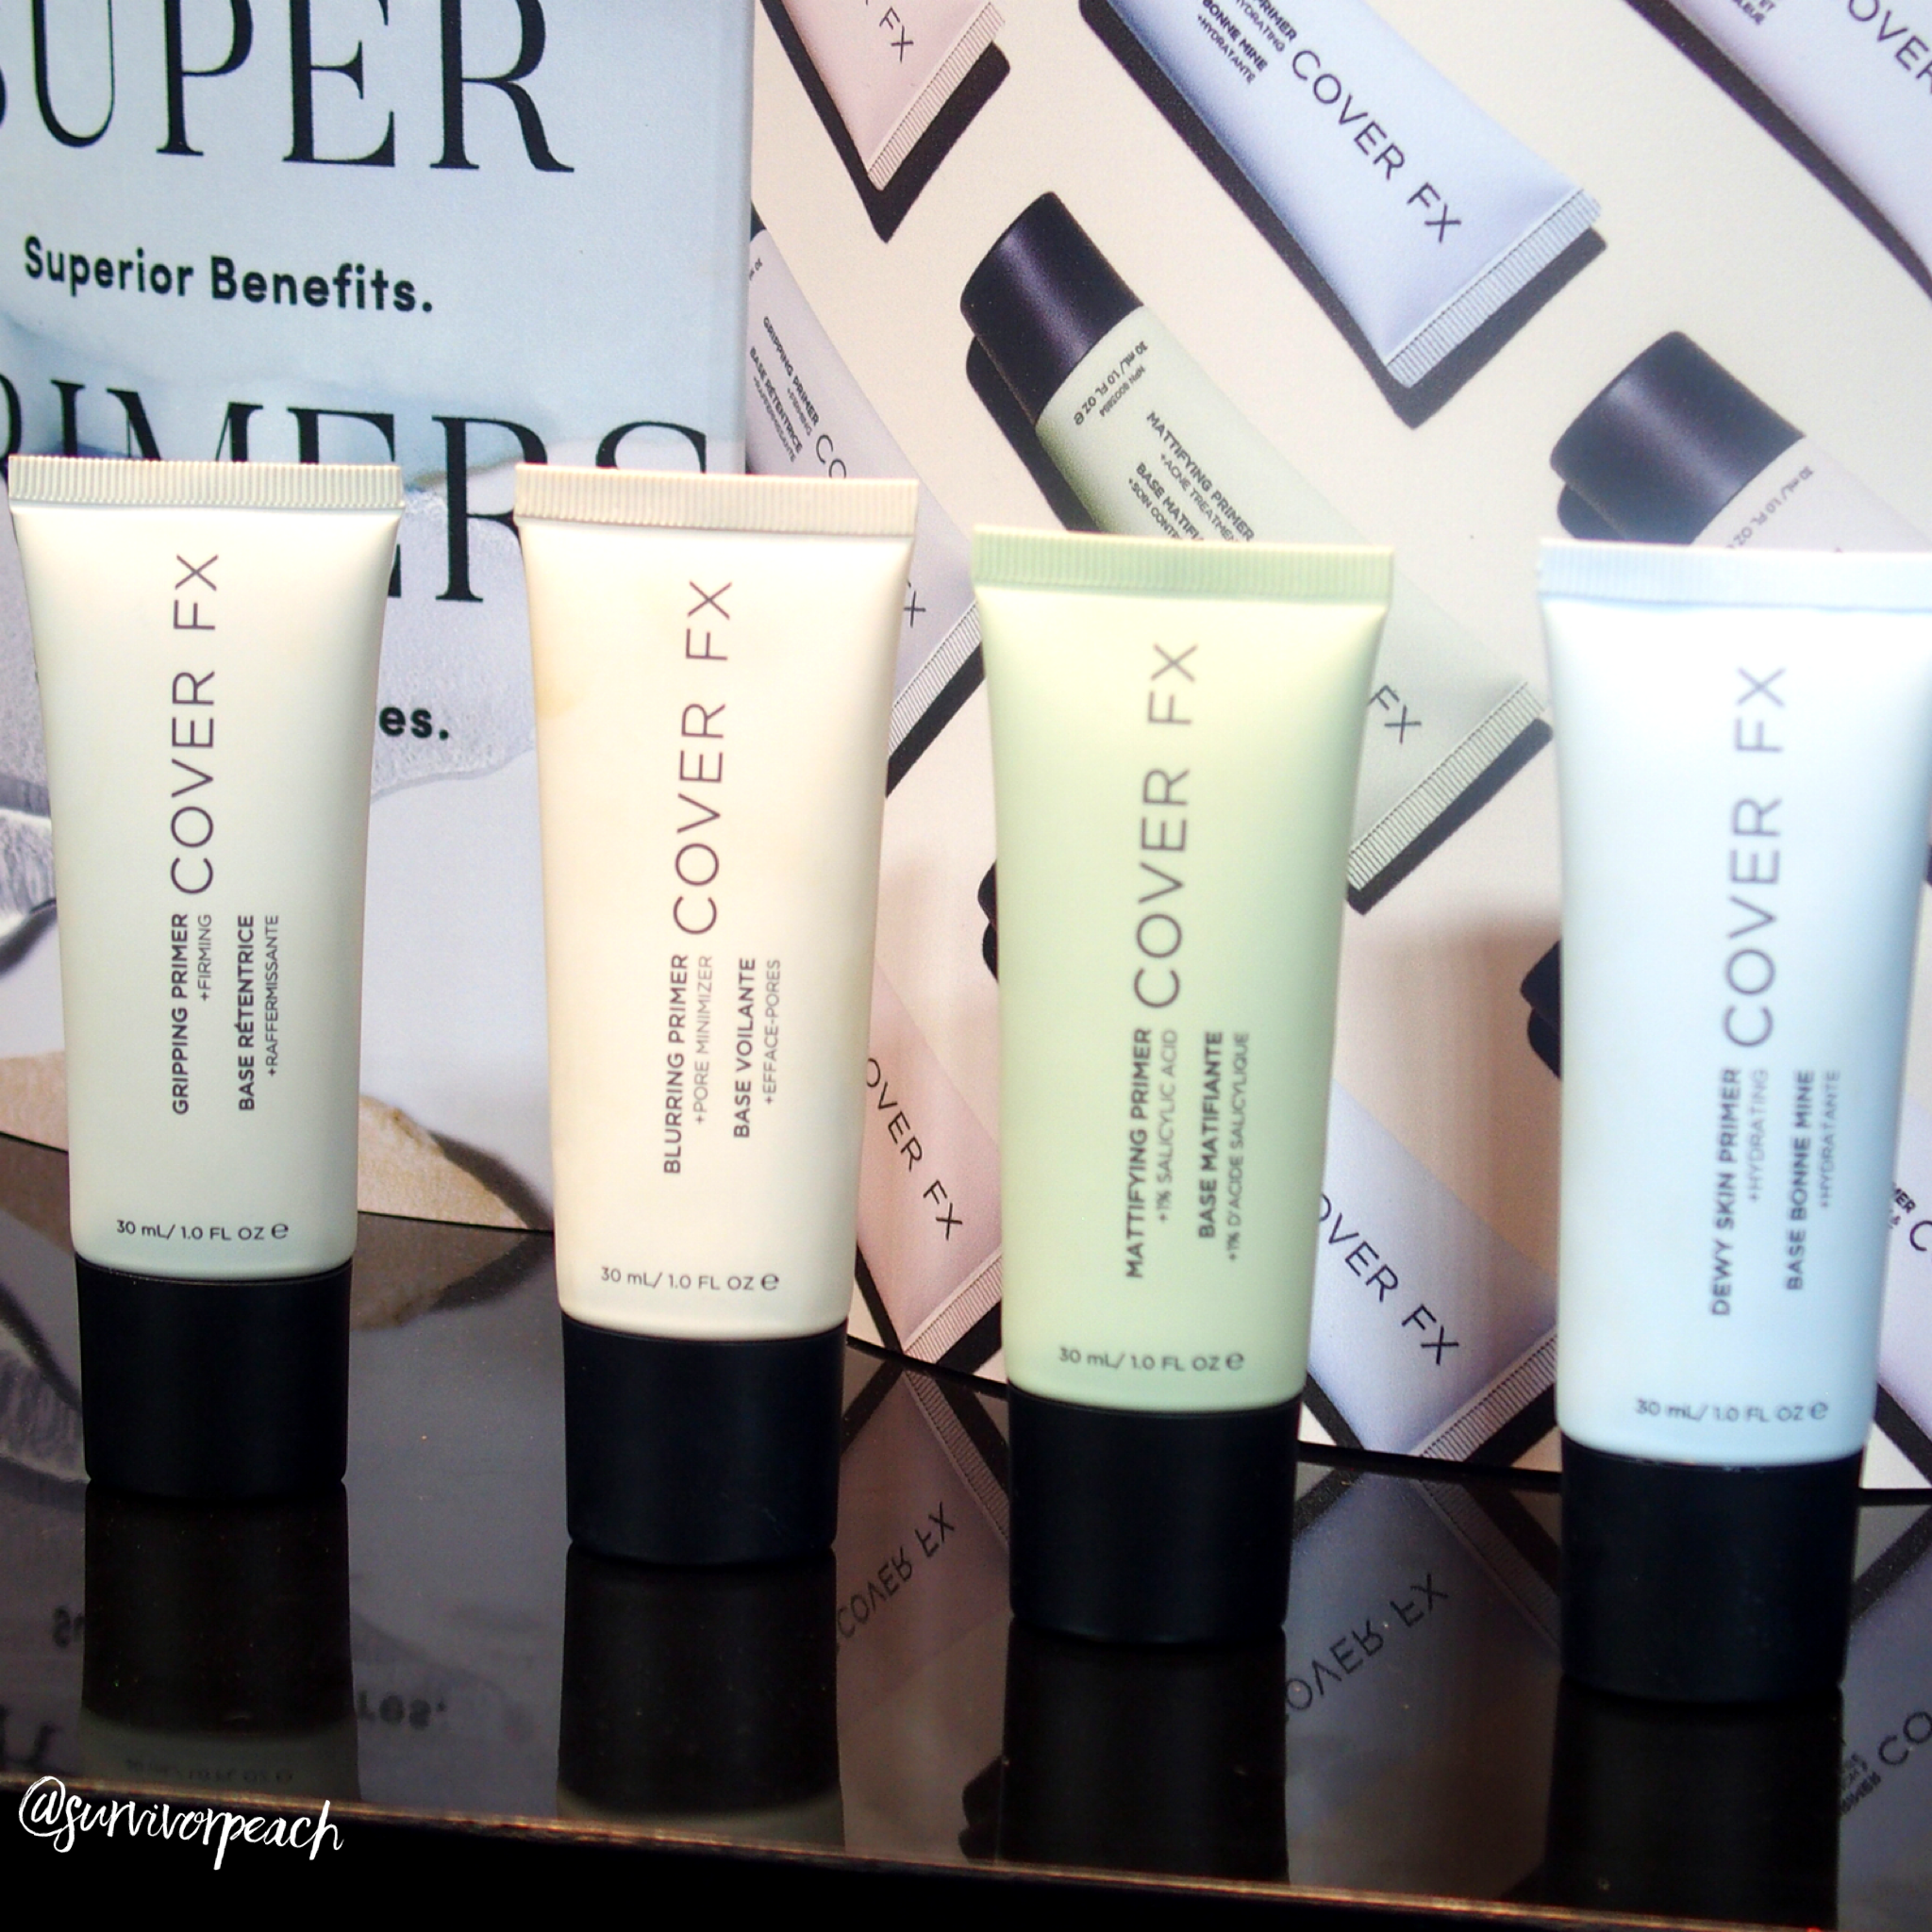 cover fx anti aging primer review)